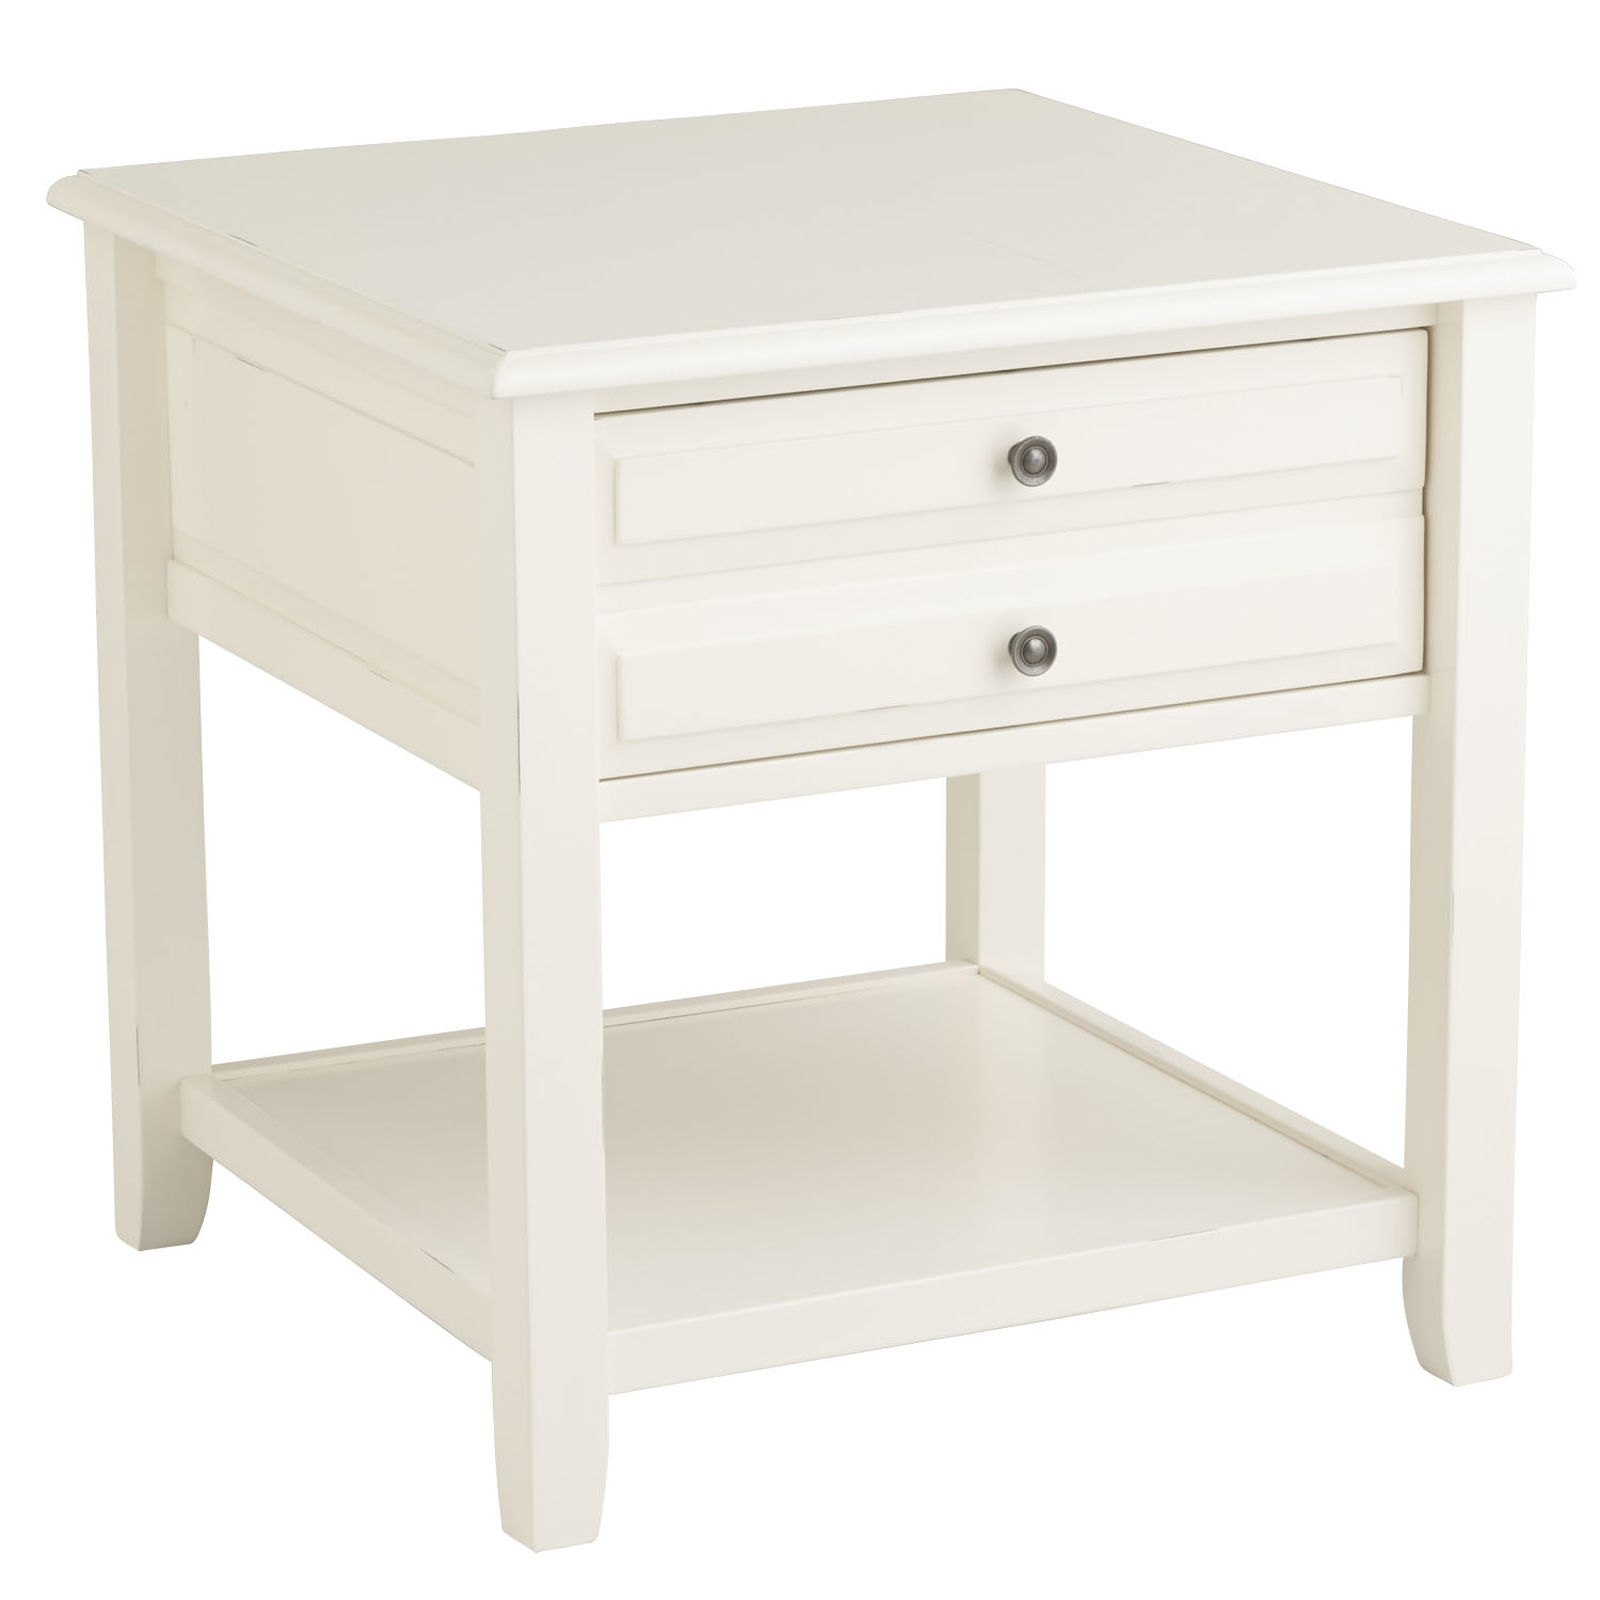 end tables mirrored table pier one home design anywhere large antique white with knobs round borghese mirror silver sturdy glass coffee and tuscan style side narrow top inch small